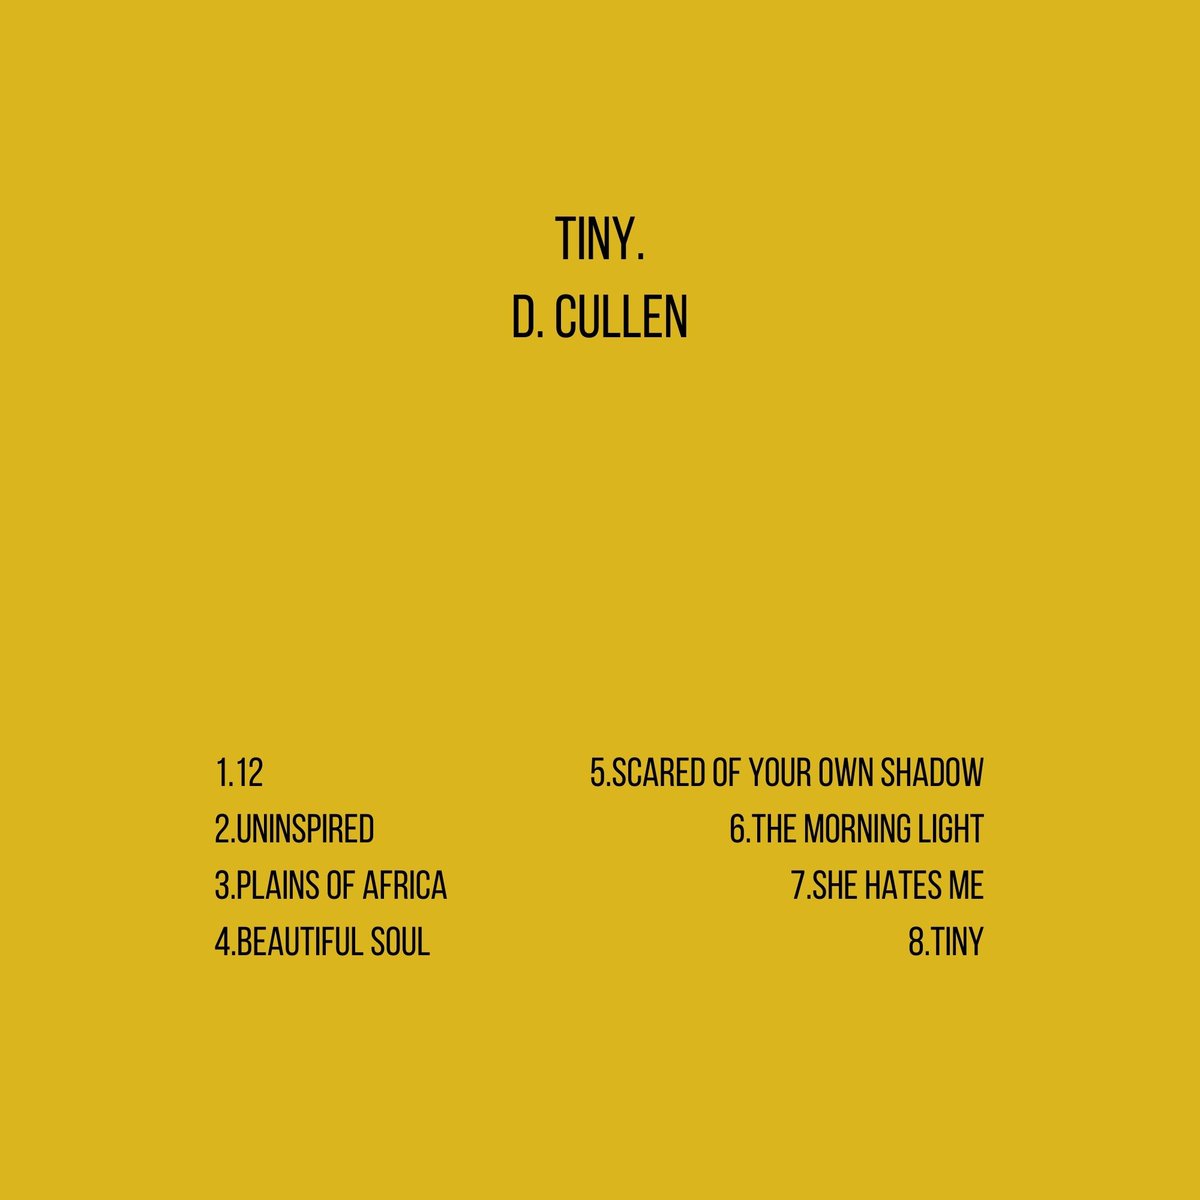 'Tiny' is out now! 8 songs, all under 2 minutes long. Stream it, share it, enjoy it! SPOTIFY: spotify.link/02c25V9PhDb BANDCAMP: dcullen.bandcamp.com/album/tiny?fro… PHYSICAL CD'S: dcullenmusic.com/shop